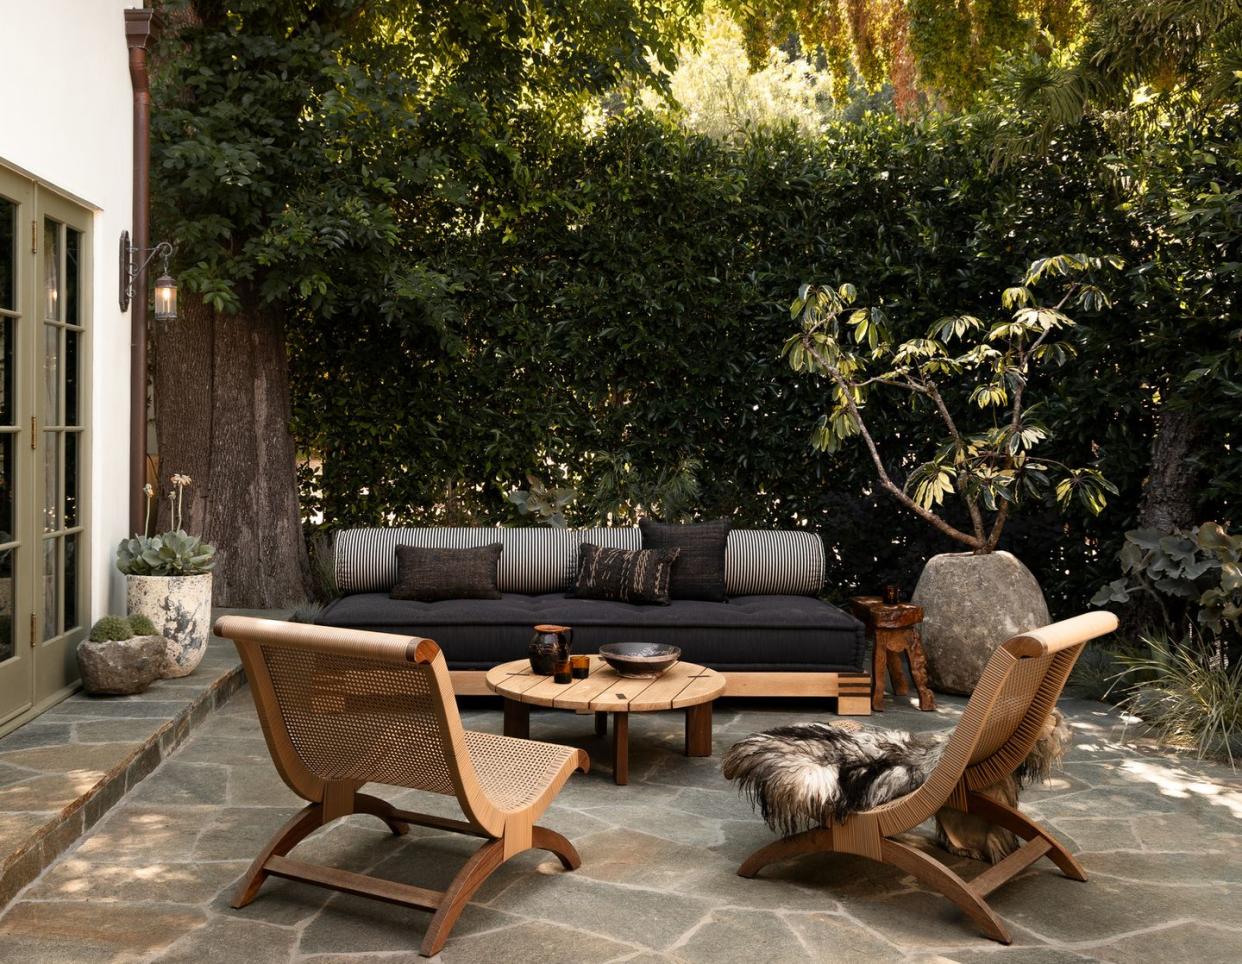 designer katie hodges's spanish cottage in the hollywood hills